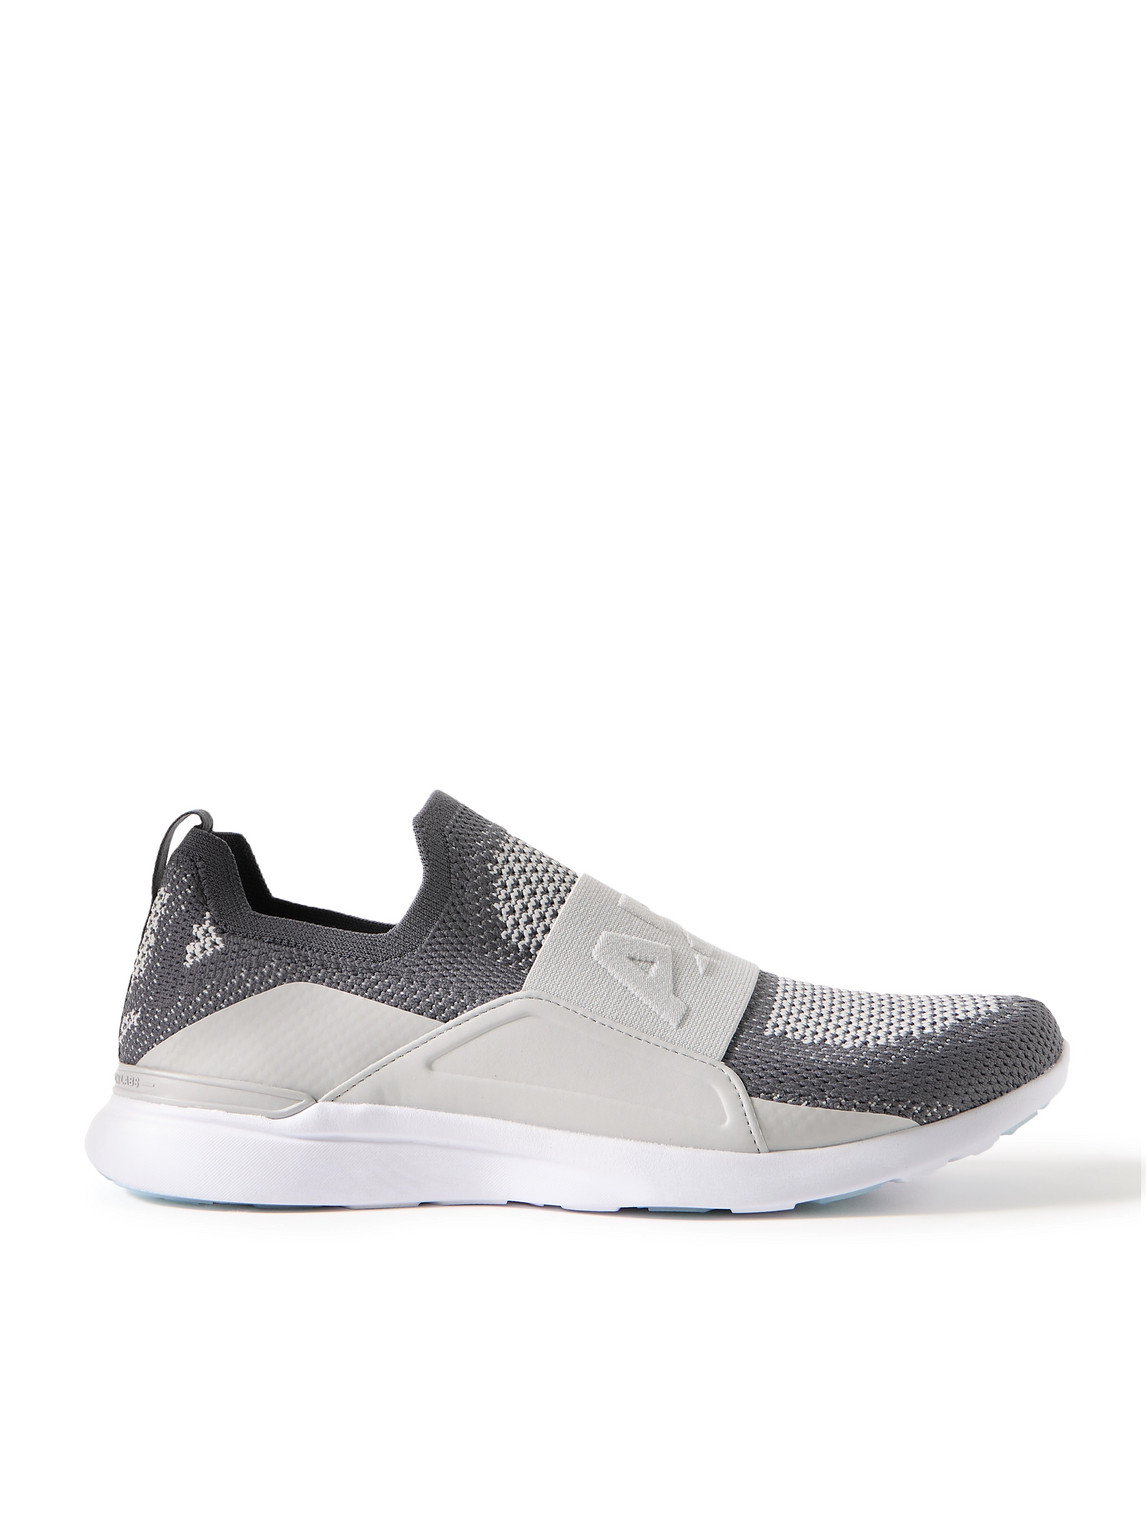 Apl Athletic Propulsion Labs Techloom Bliss Slip-on Trainers In Grey